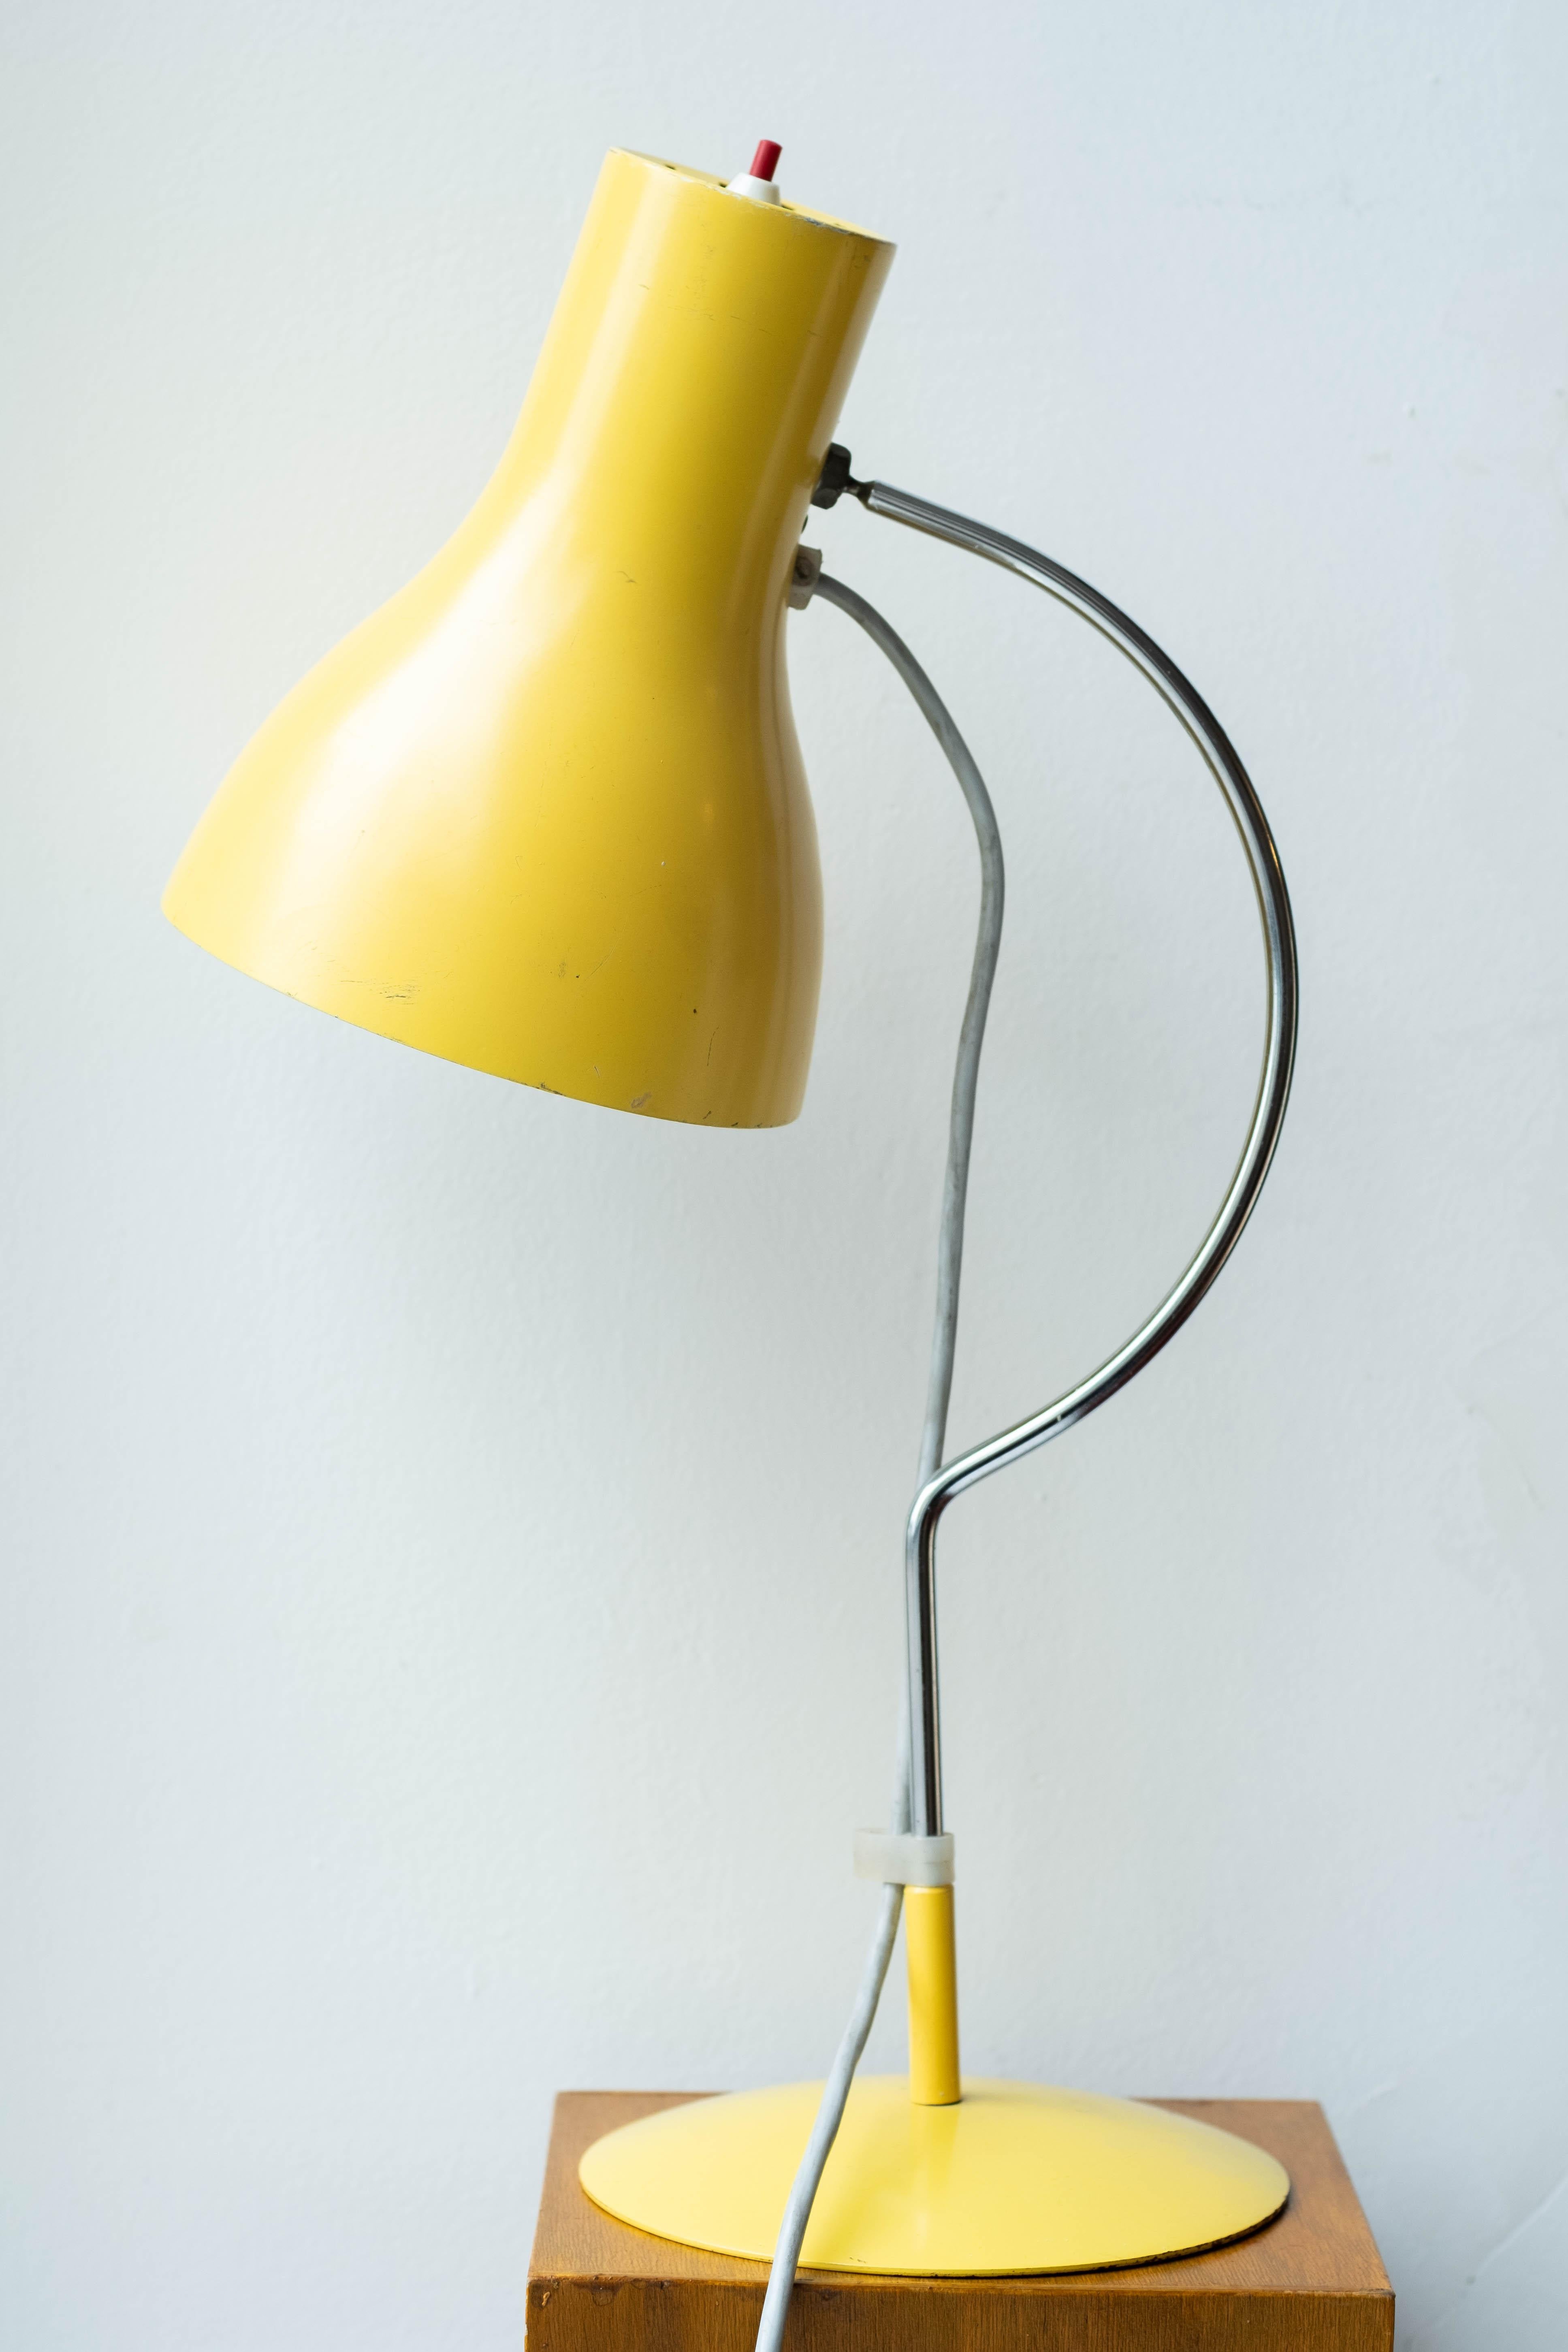 Midcentury yellow table lamp from Chech designer Josef Hurka
Made by the company Napako in the 1970s, it is also known as 